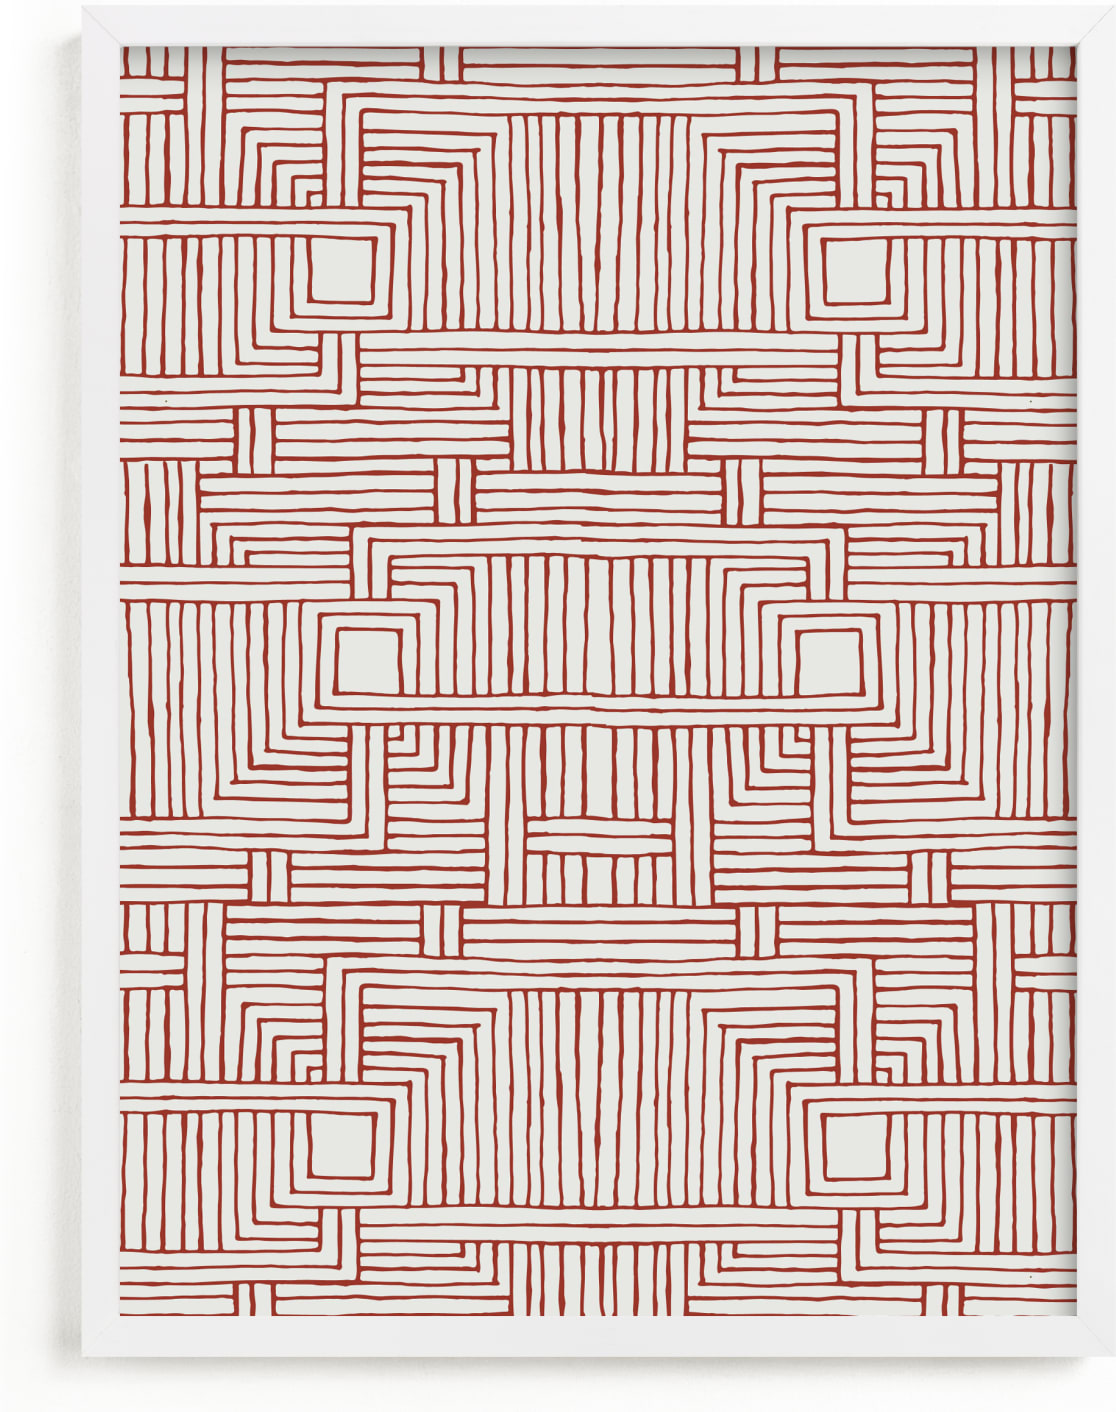 This is a red art by Katie Zimpel called Weaving Doodle.